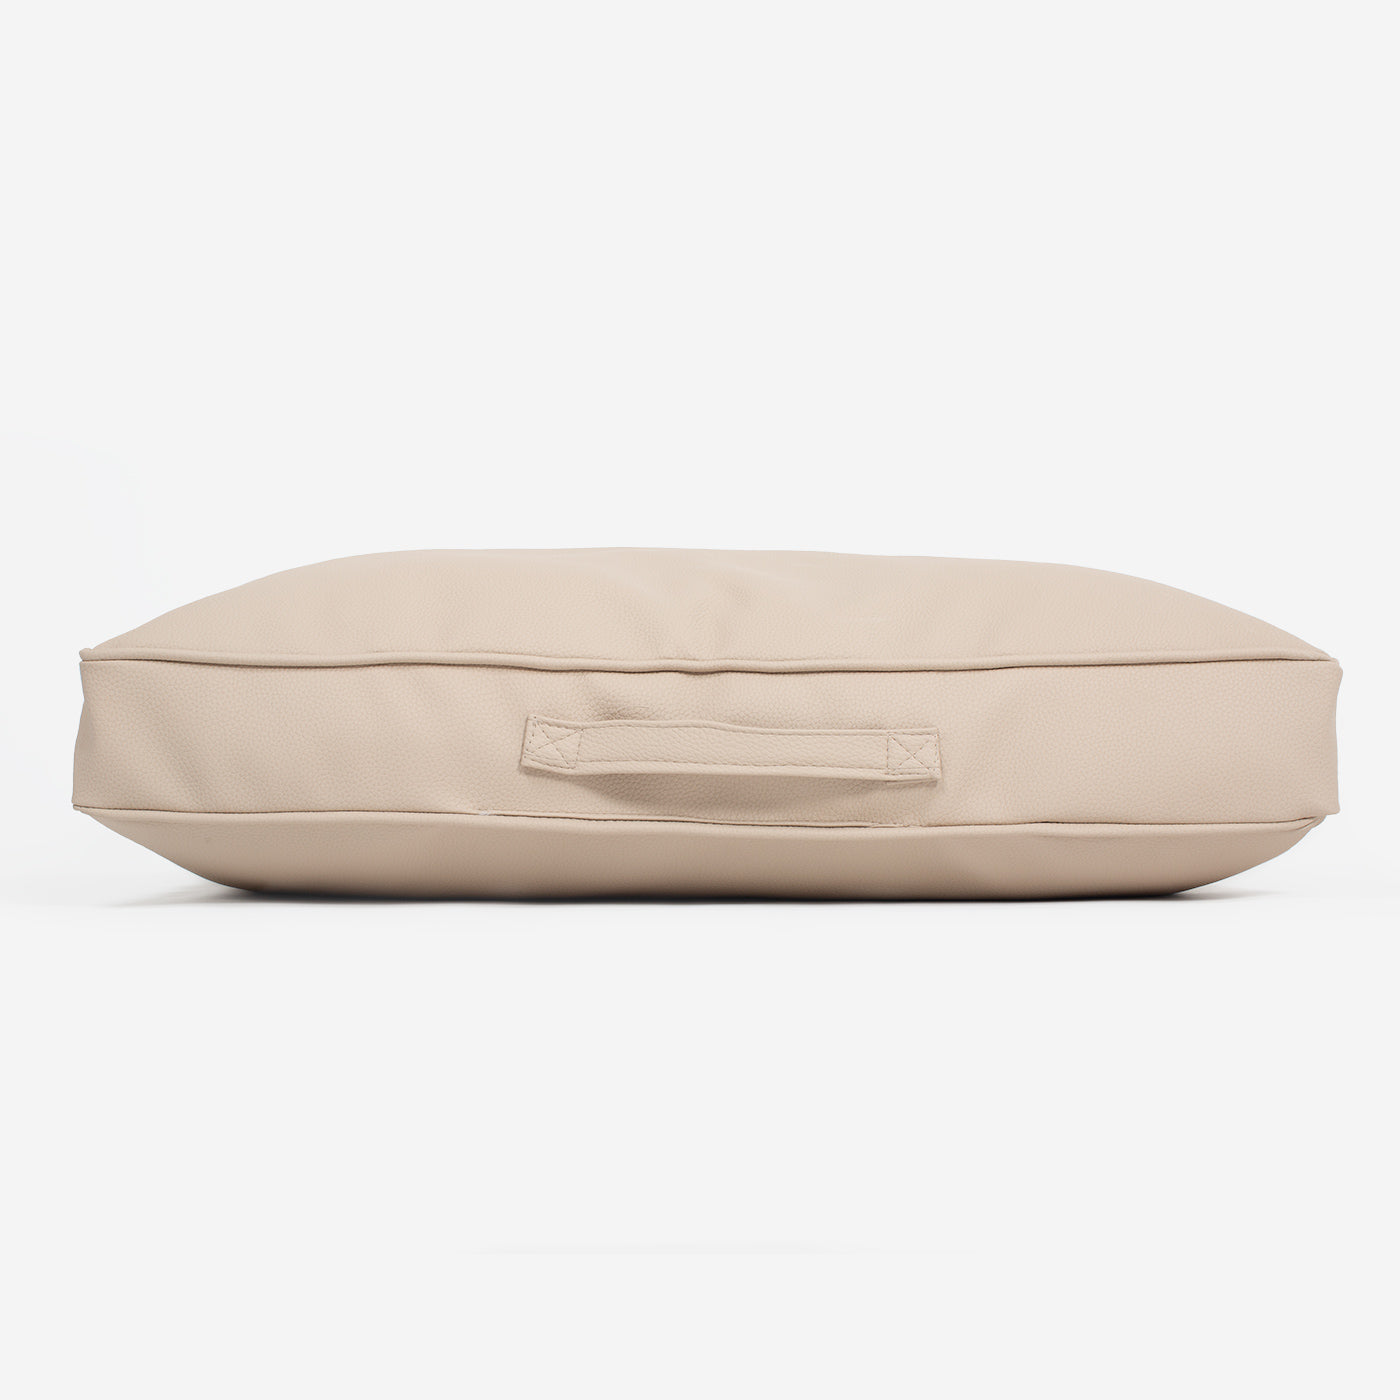 [color:sand] Luxury Dog Cushion in Rhino Tough Faux Leather in Sand, The Perfect Pet Bed Time Accessory! Available Now at Lords & Labradors 